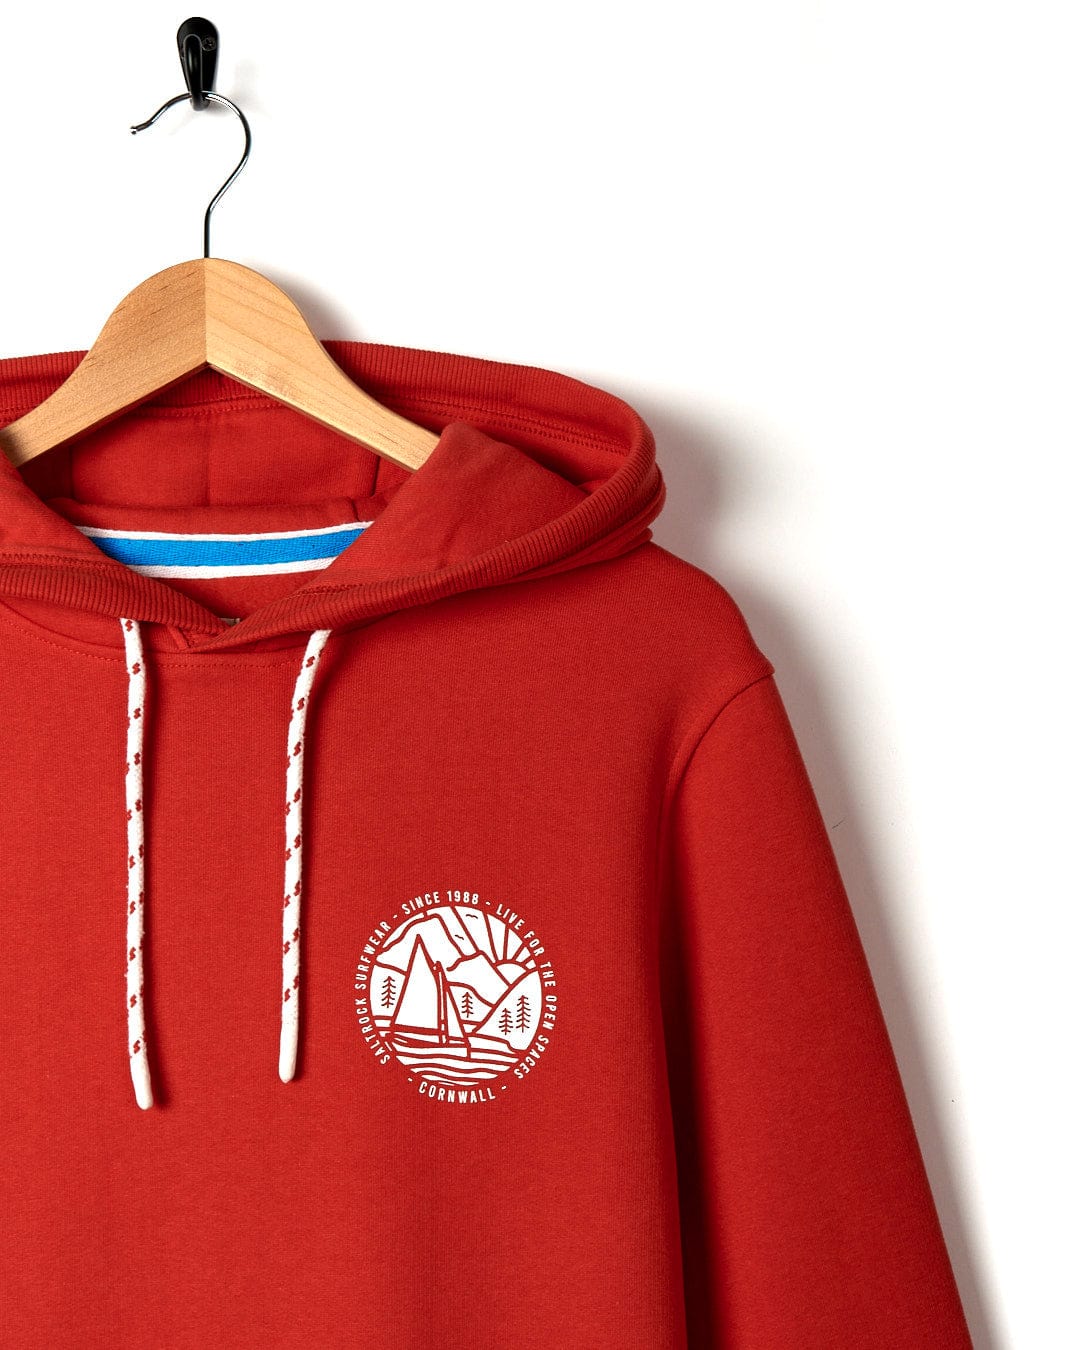 A Cornwall Sailaway - Mens Pop Hoodie - Red with a white Saltrock logo on it.